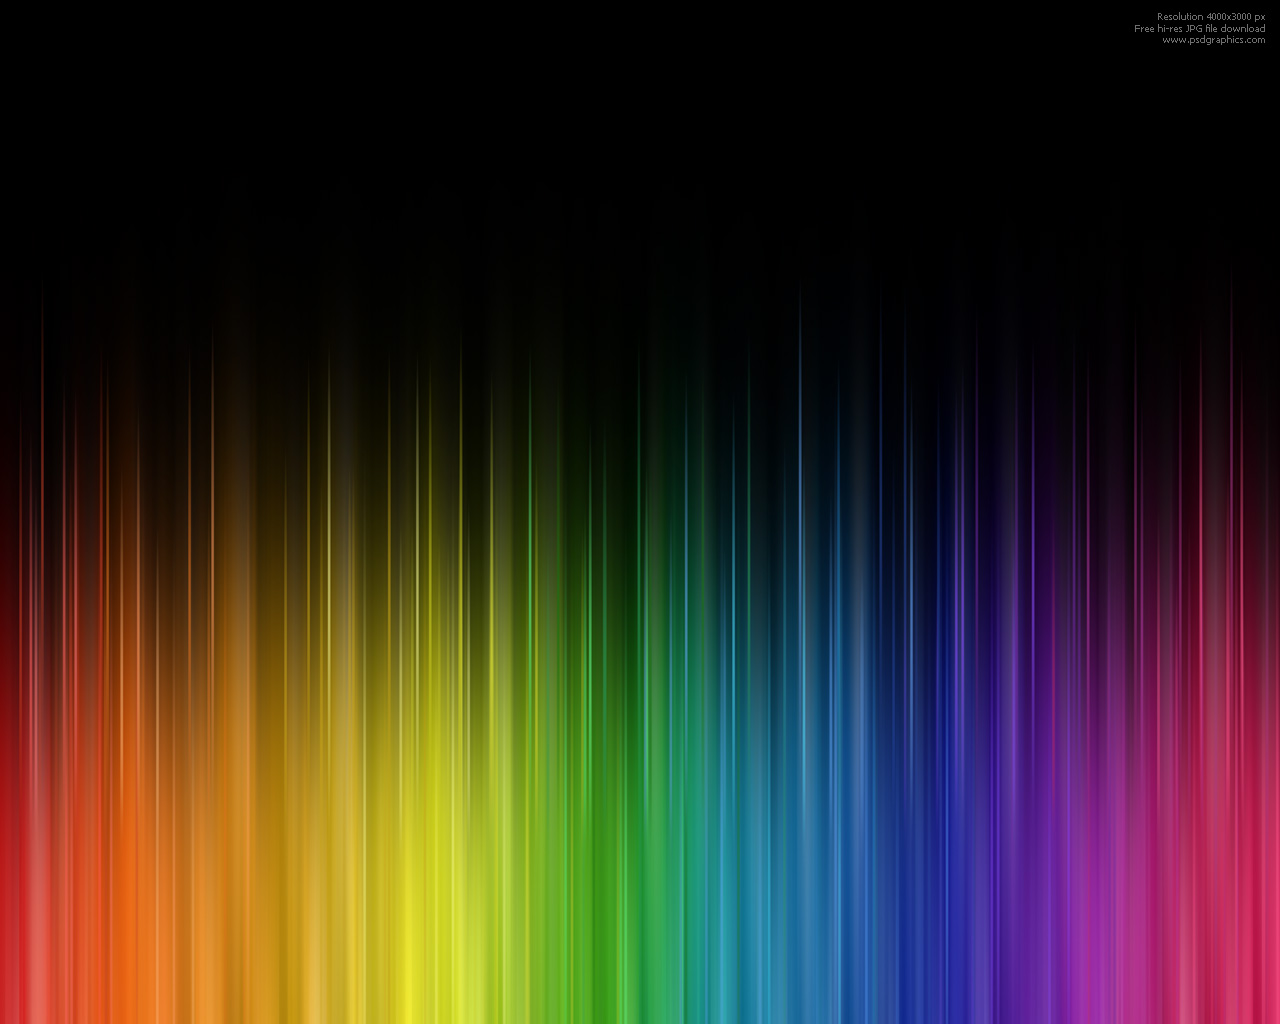 Awesome Colorful Background HD Wallpaper In Others Imageci